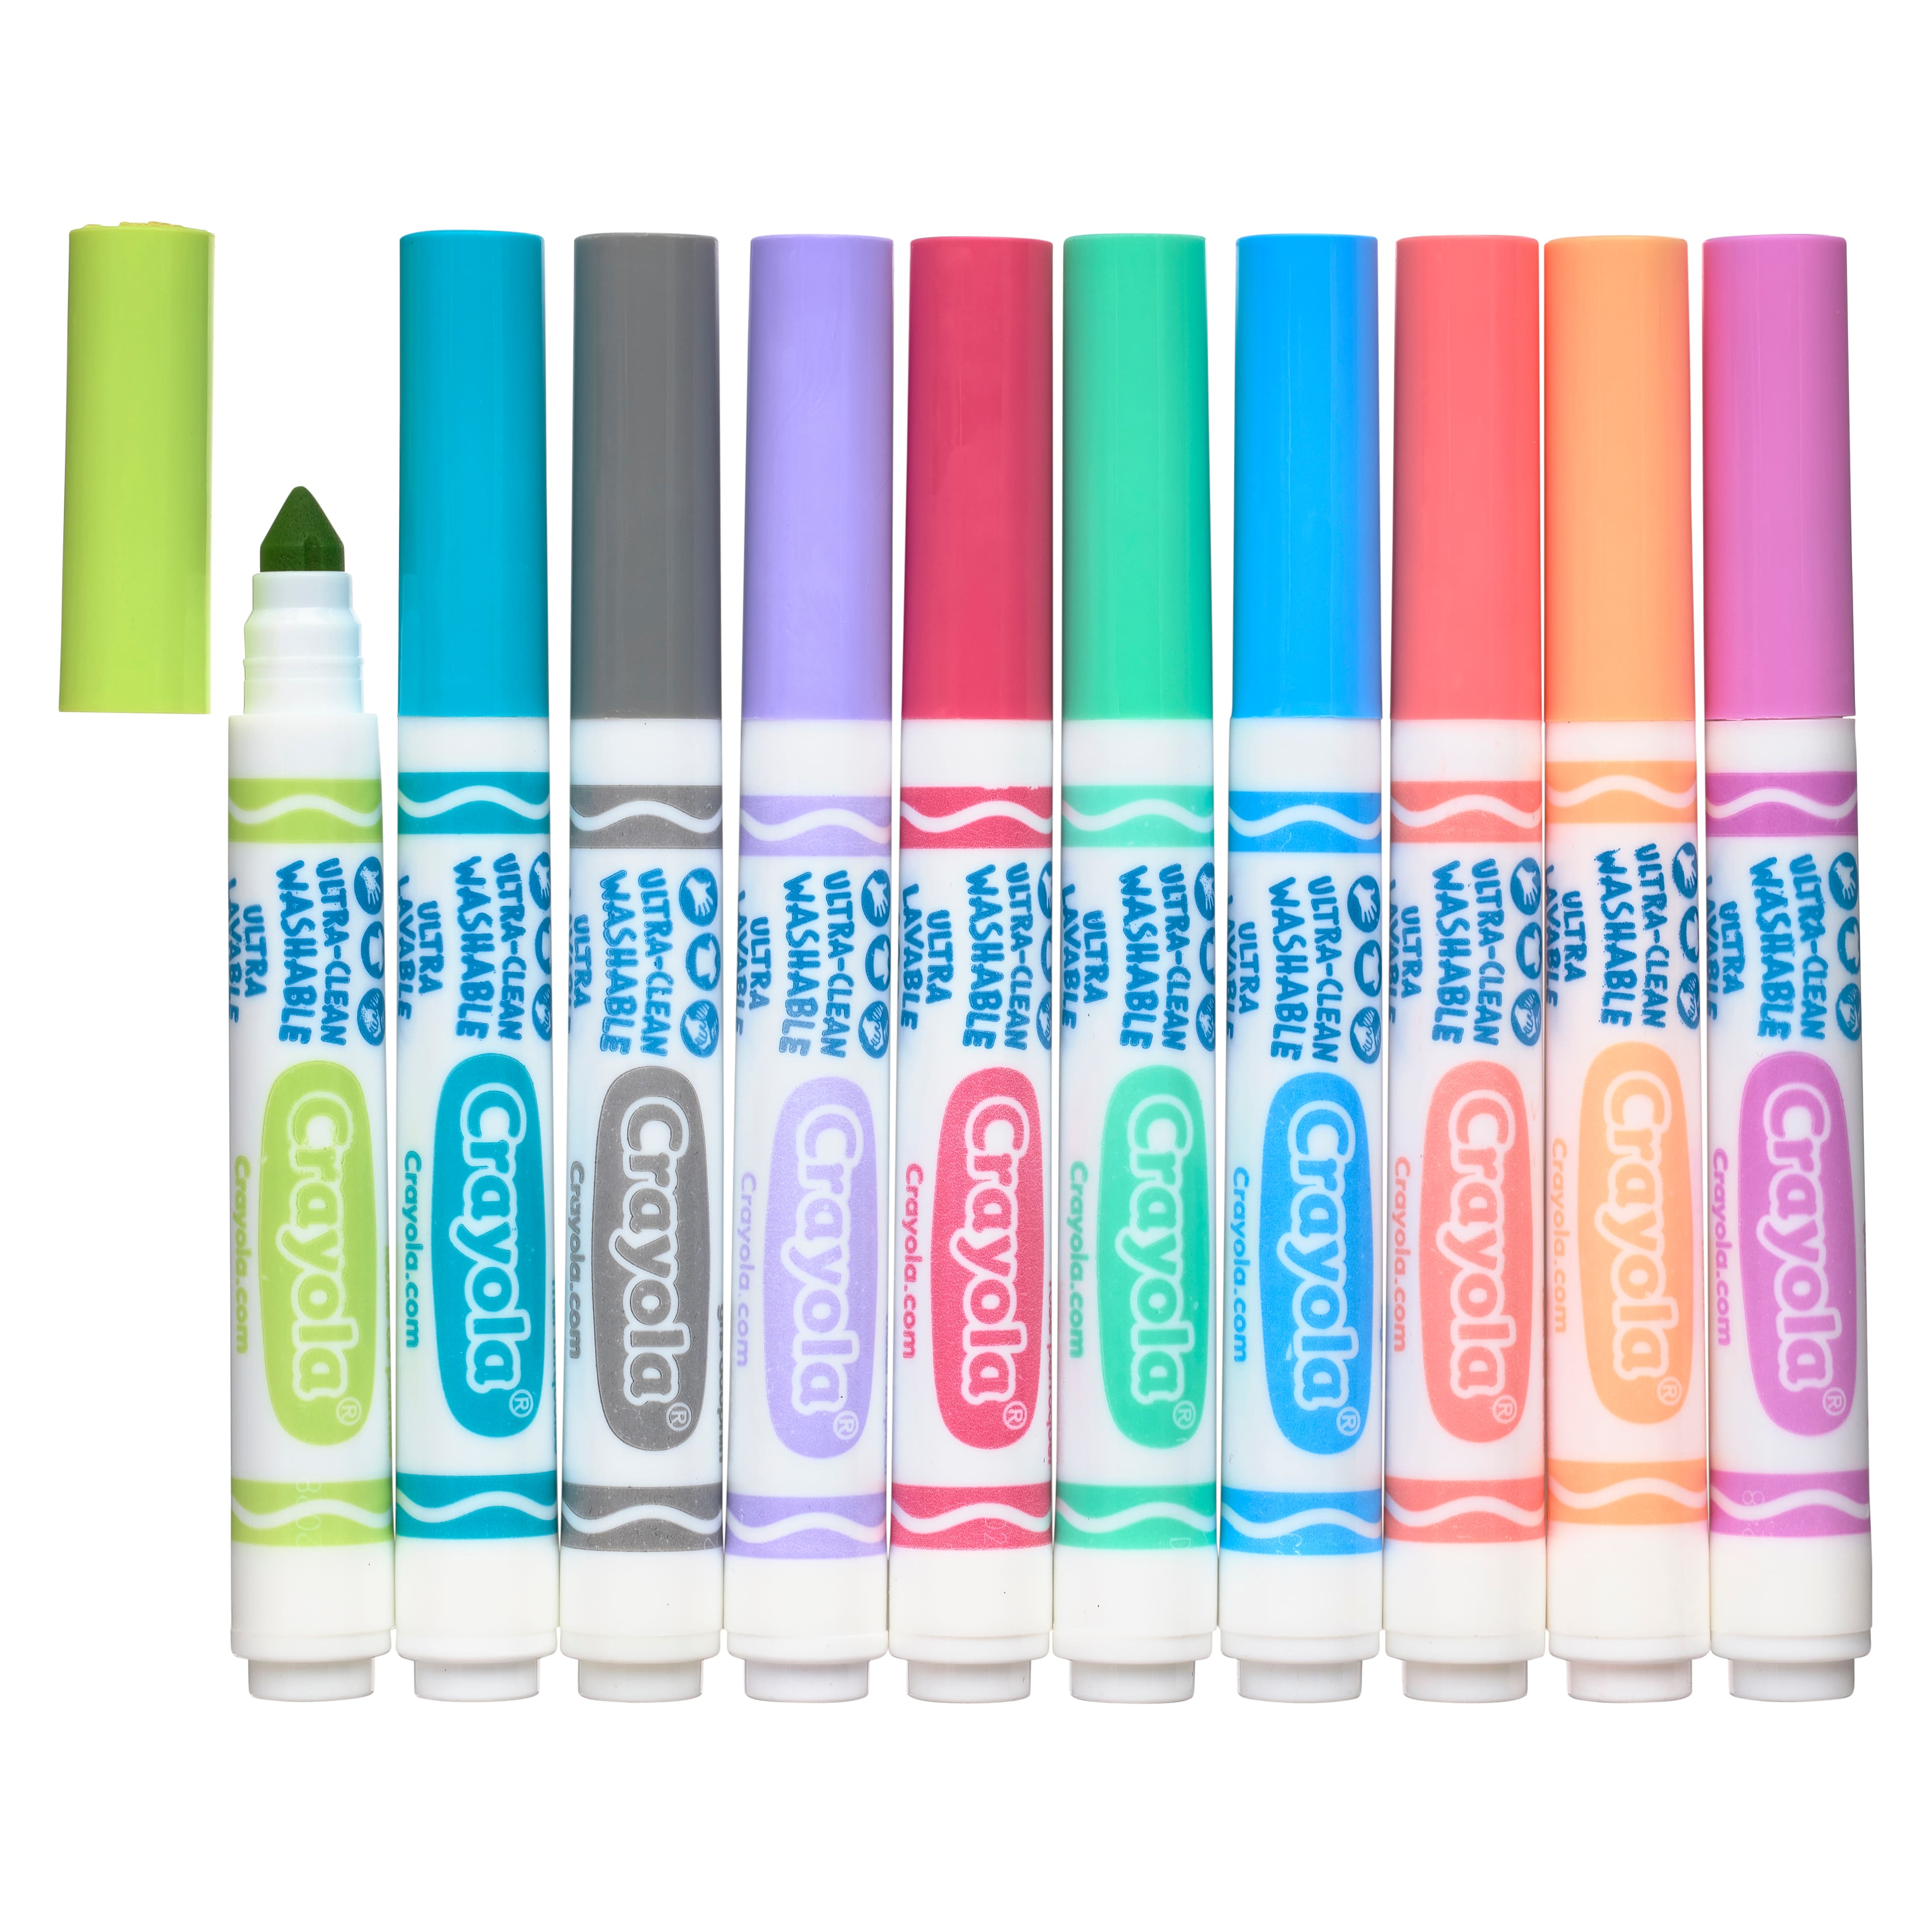 Shop for the Crayola® Ultra-Clean™ Washable Stamper Markers at Michaels